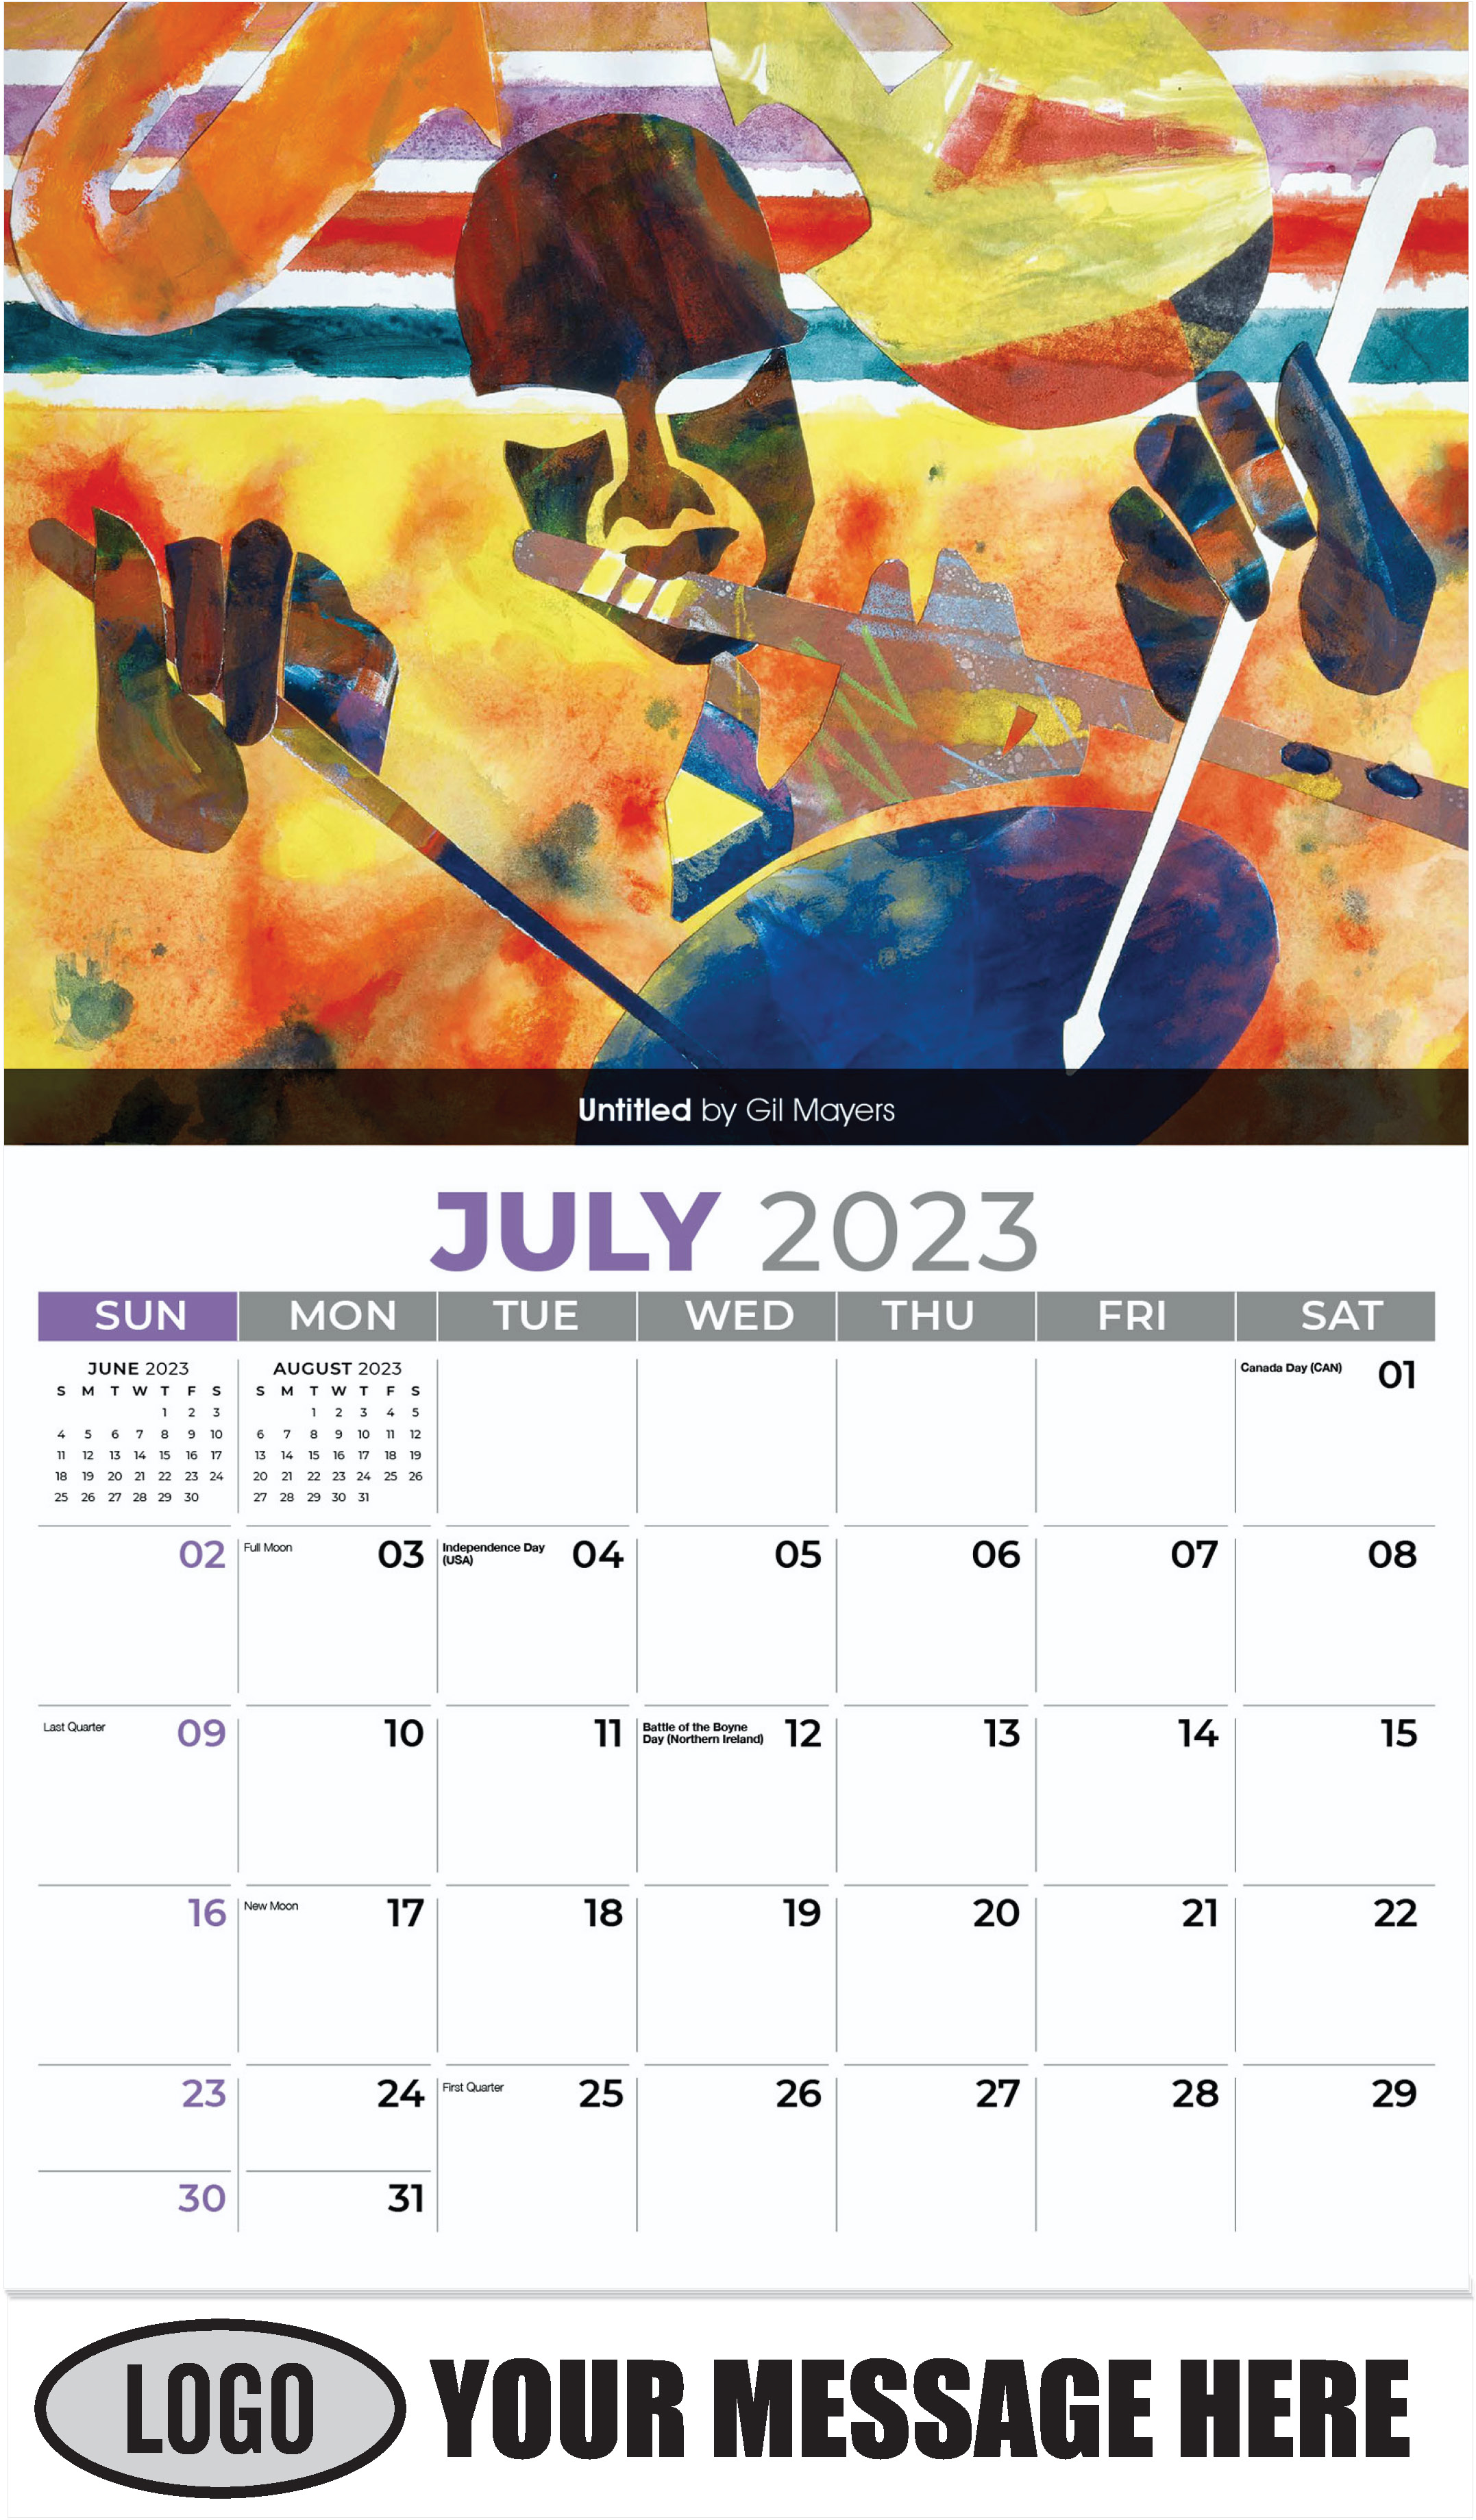 Untitled by Gil Mayers - July - Celebration of African American Art 2023 Promotional Calendar